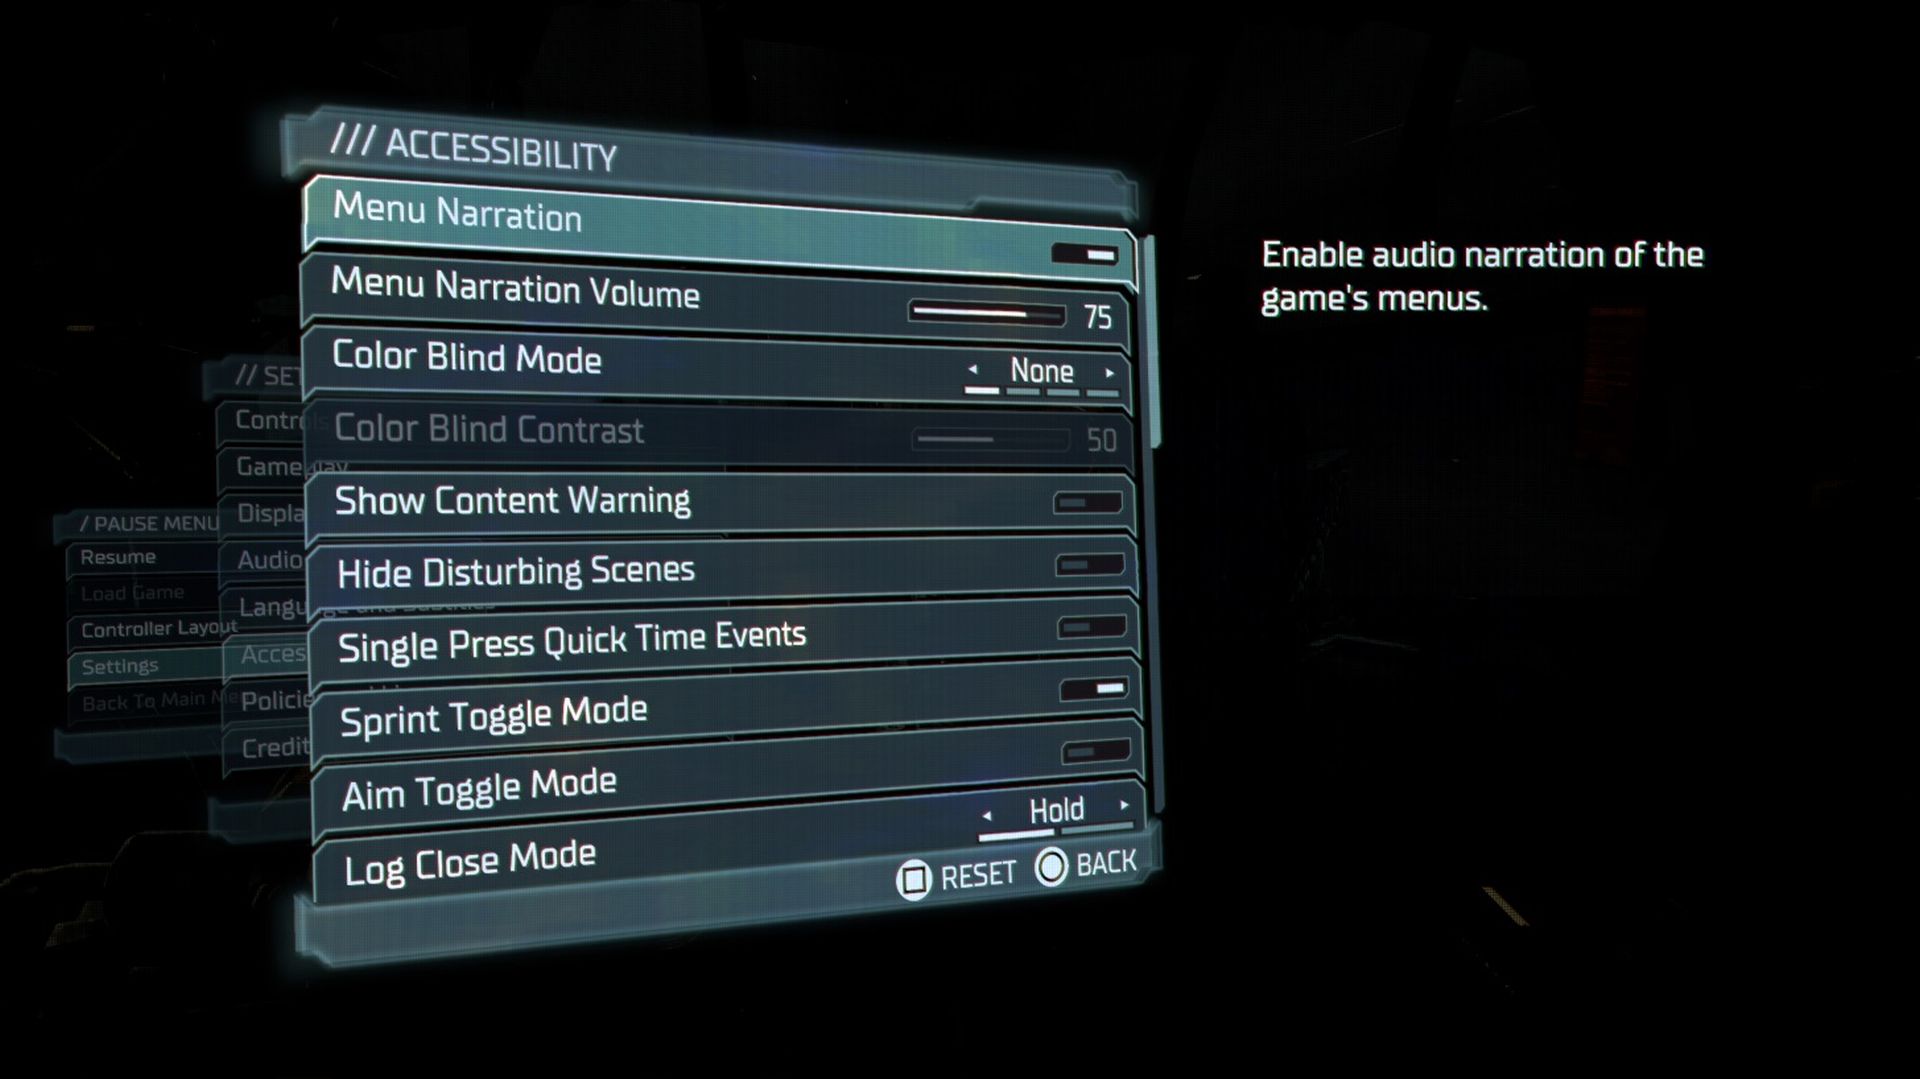 Part of the accessibility settings in Dead Space